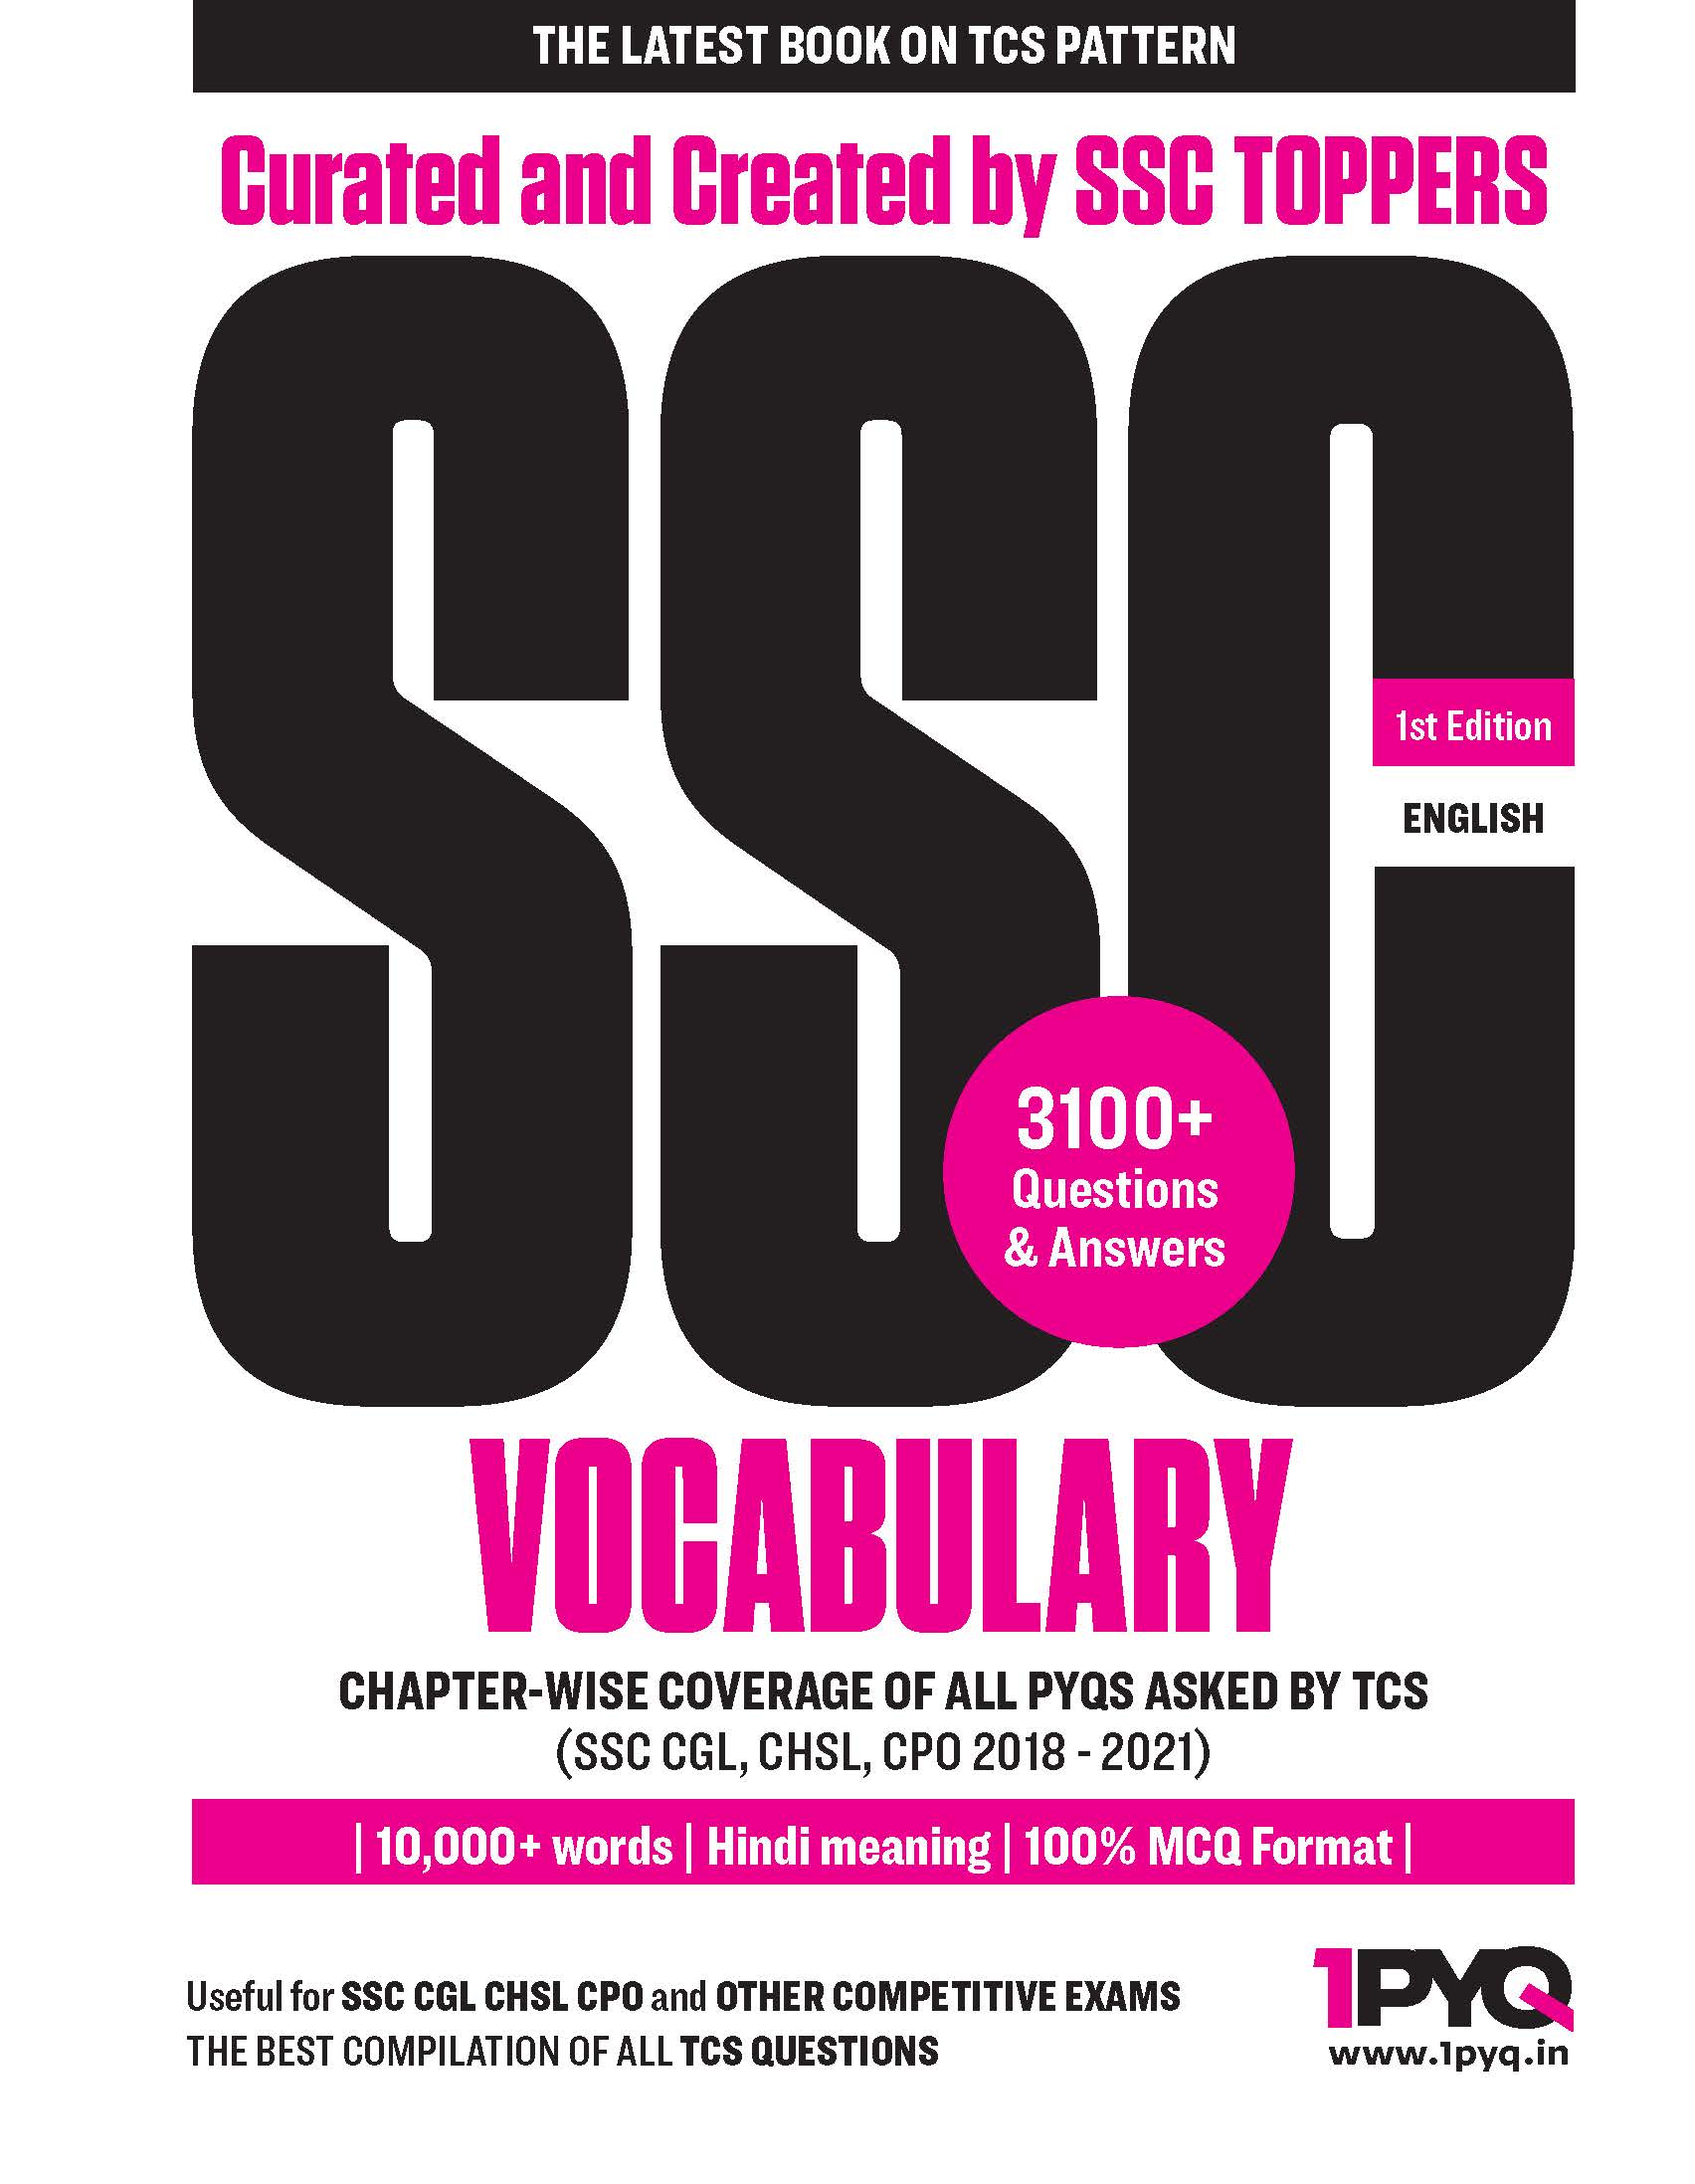 SSC English VOCAB 3100+ PYQ (with Hindi Meaning)